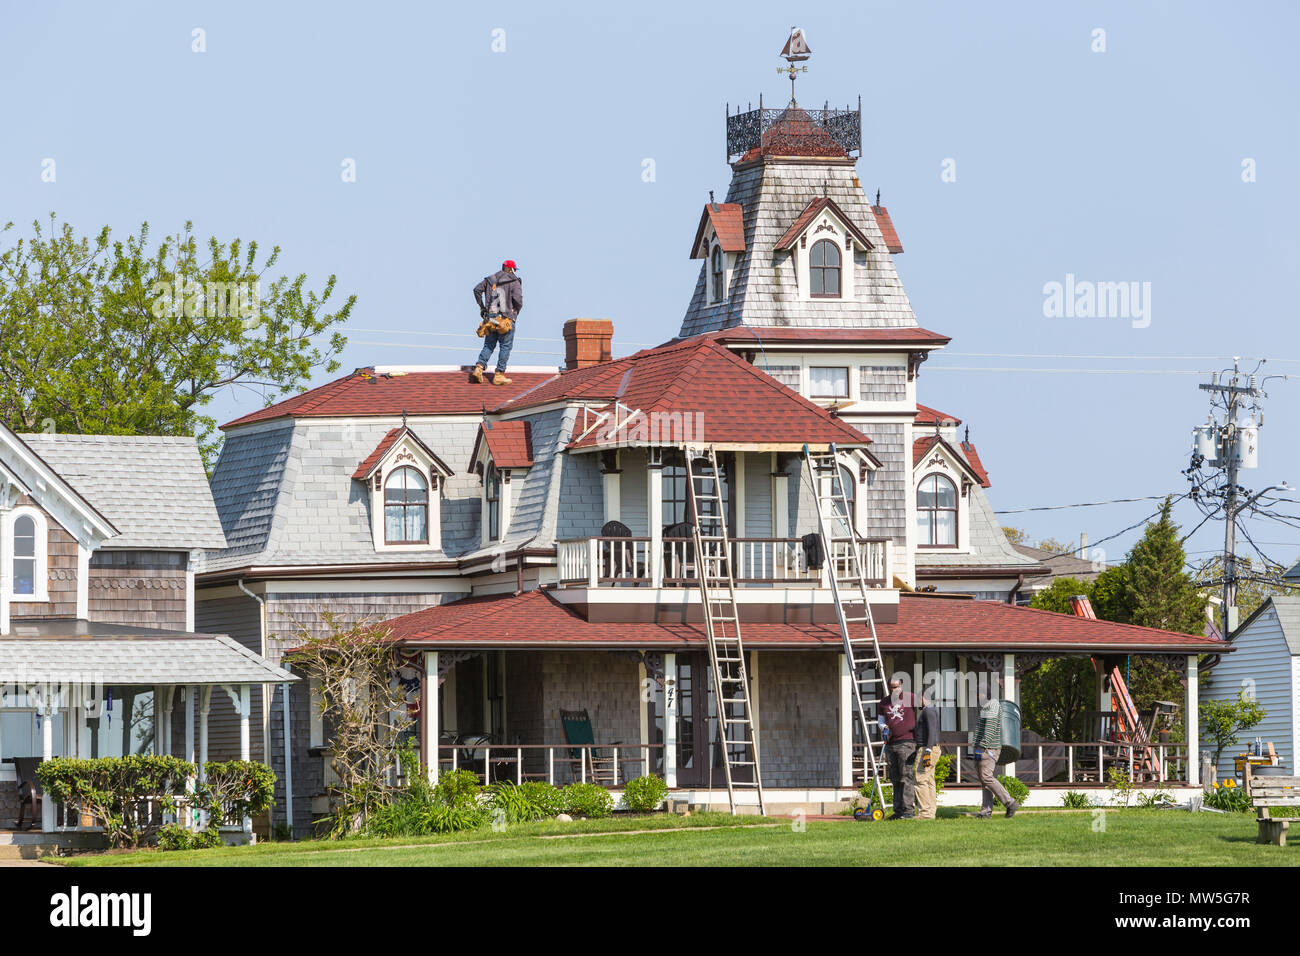 Workers make spring roof repairs to a Victorian era home on Ocean Avenue in Oak Bluffs, Massachusetts on Martha's Vineyard. Stock Photo